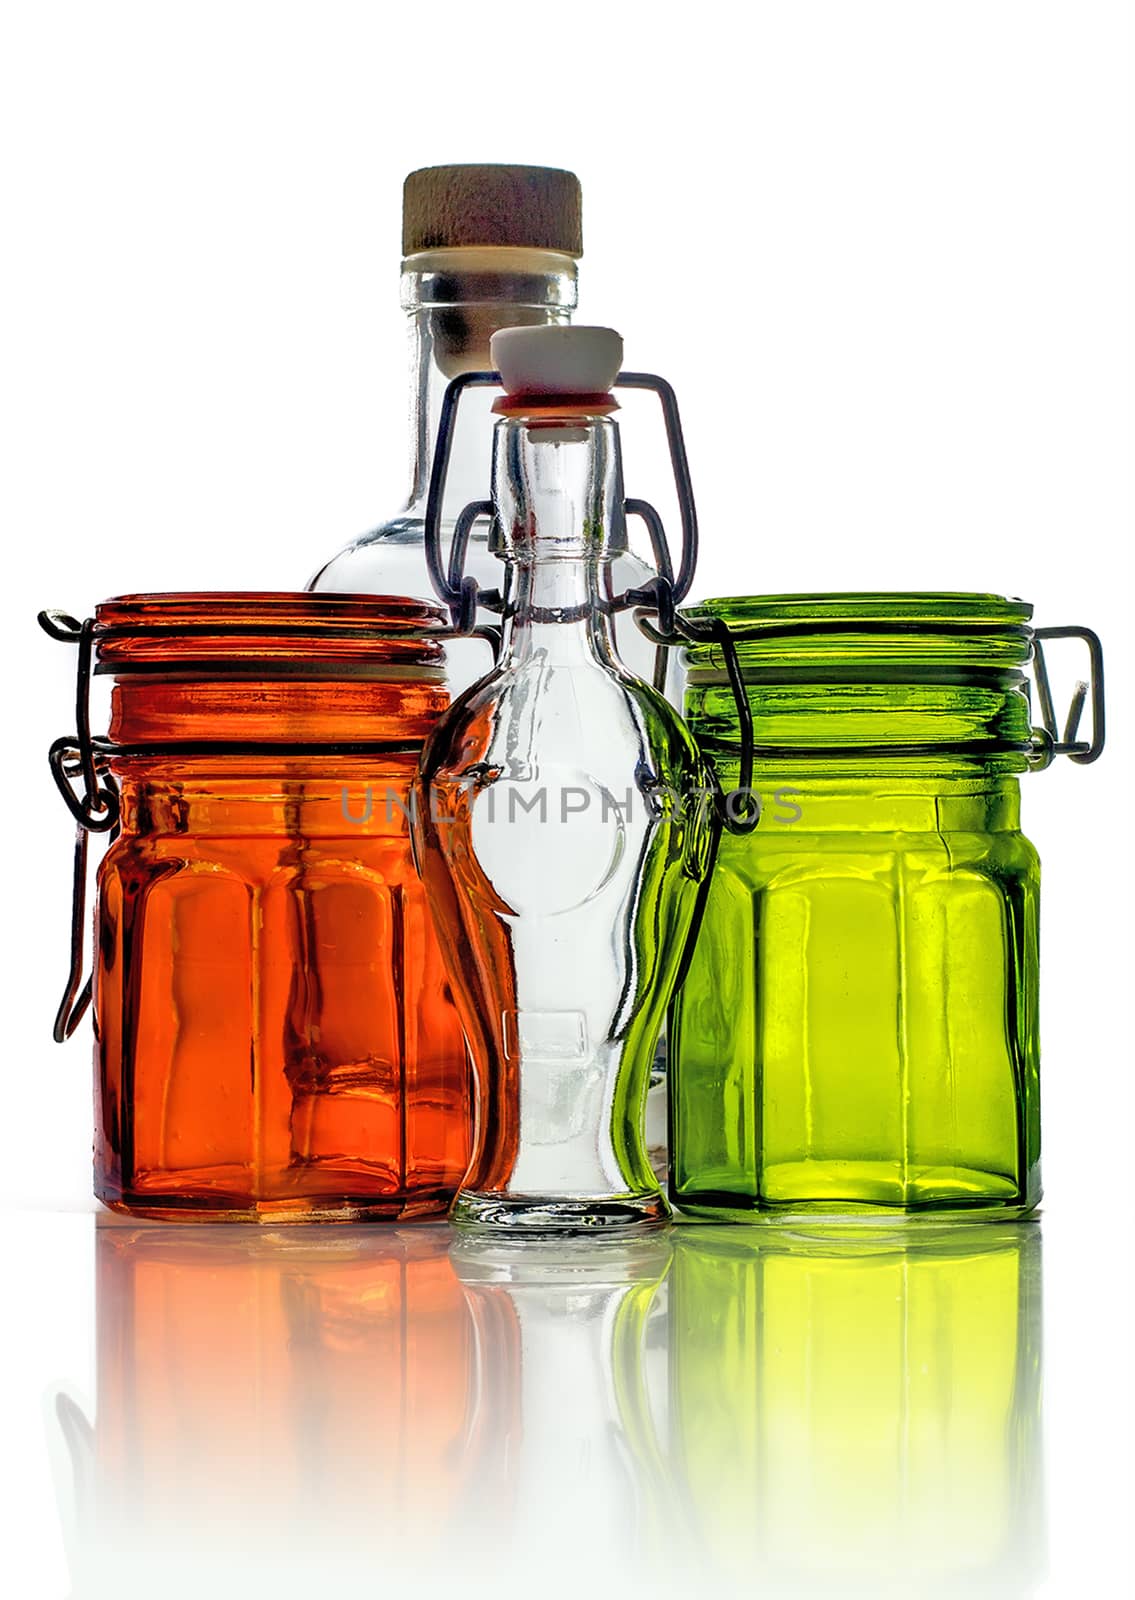 Empty glass jars and empty little glass bottles isolated on white background